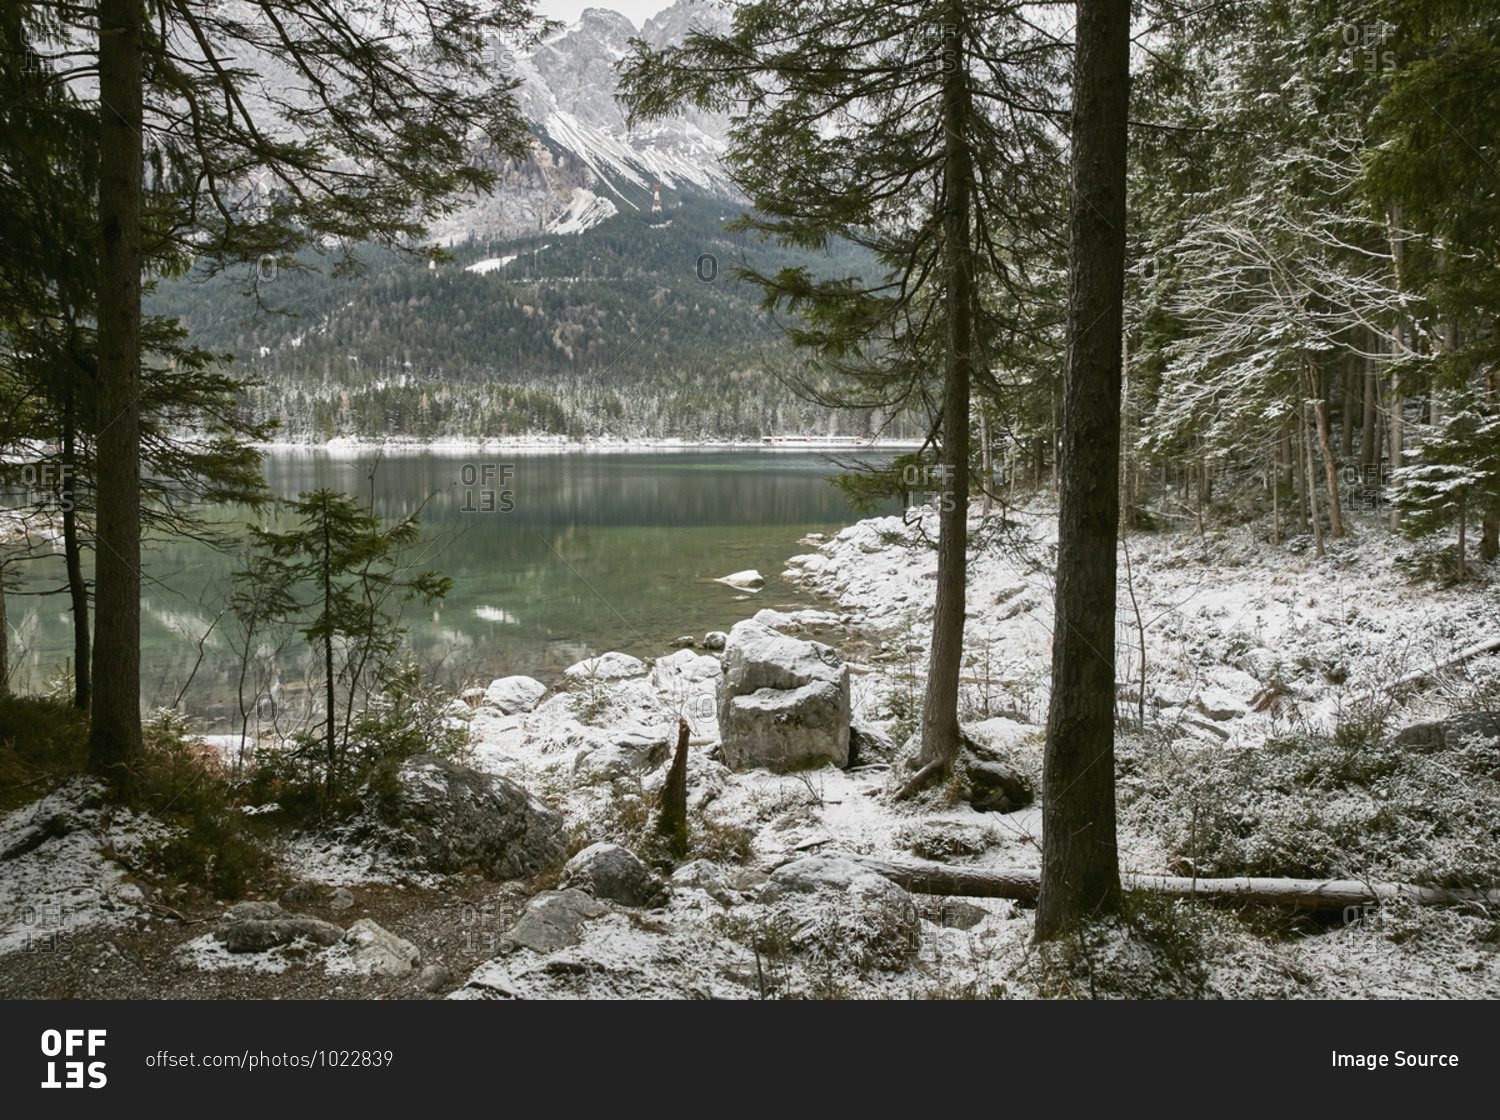 Snowy landscape with forests around Lake Eibsee, Zugspitze, Bavaria, Germany